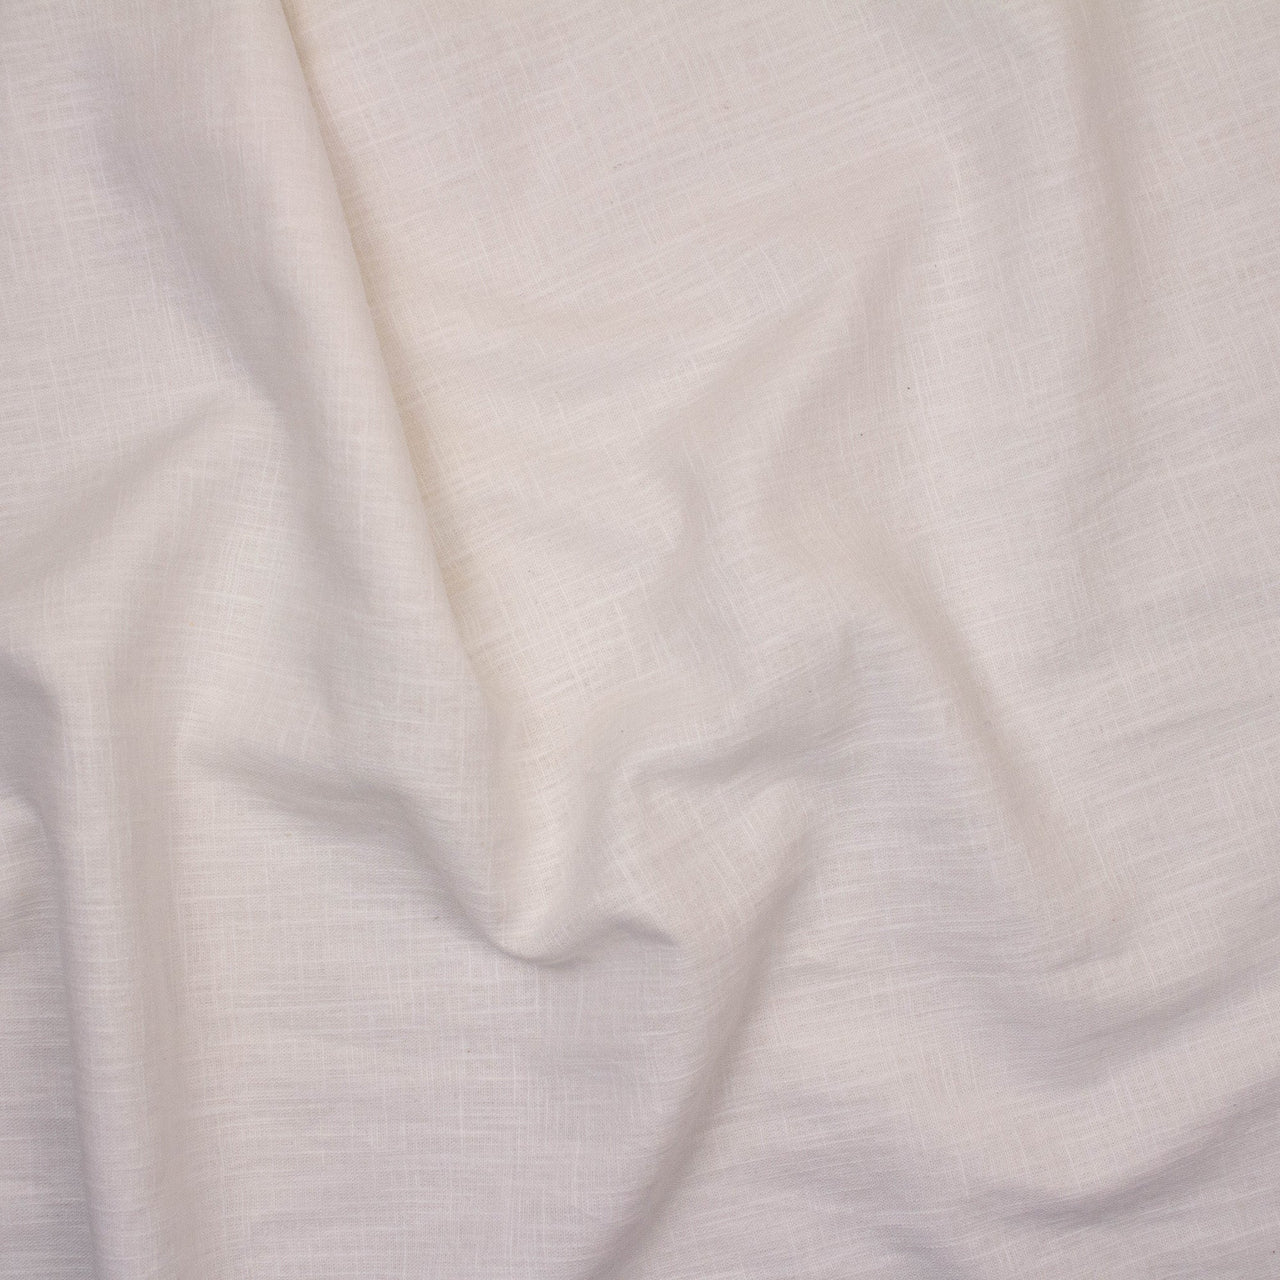 White -  Eco Friendly 100% Linen Fabric -Superior Quality Enzyme washed and Okeo-Tex Cert